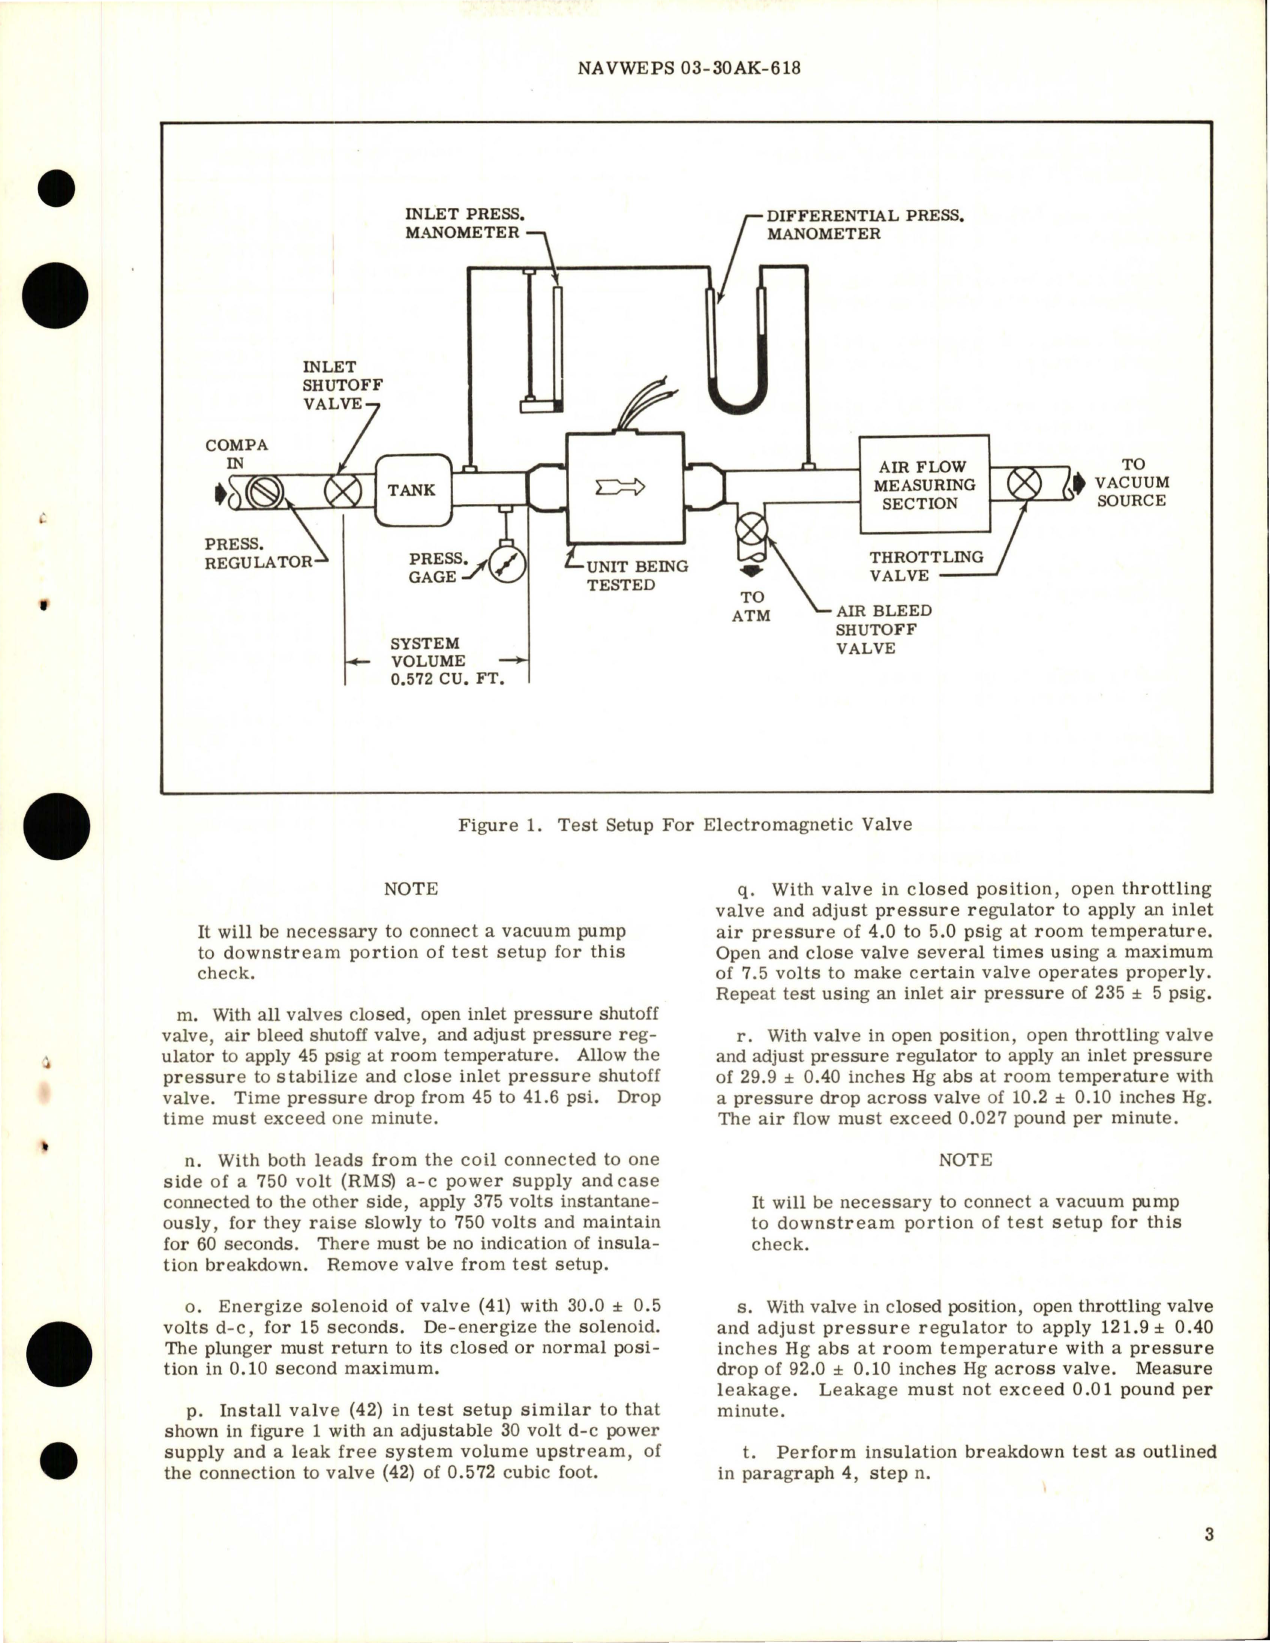 Sample page 5 from AirCorps Library document: Overhaul Instructions with Parts Breakdown for Pressure Regulating Air Shutoff Valve - Part 105230-450-2, SR 7